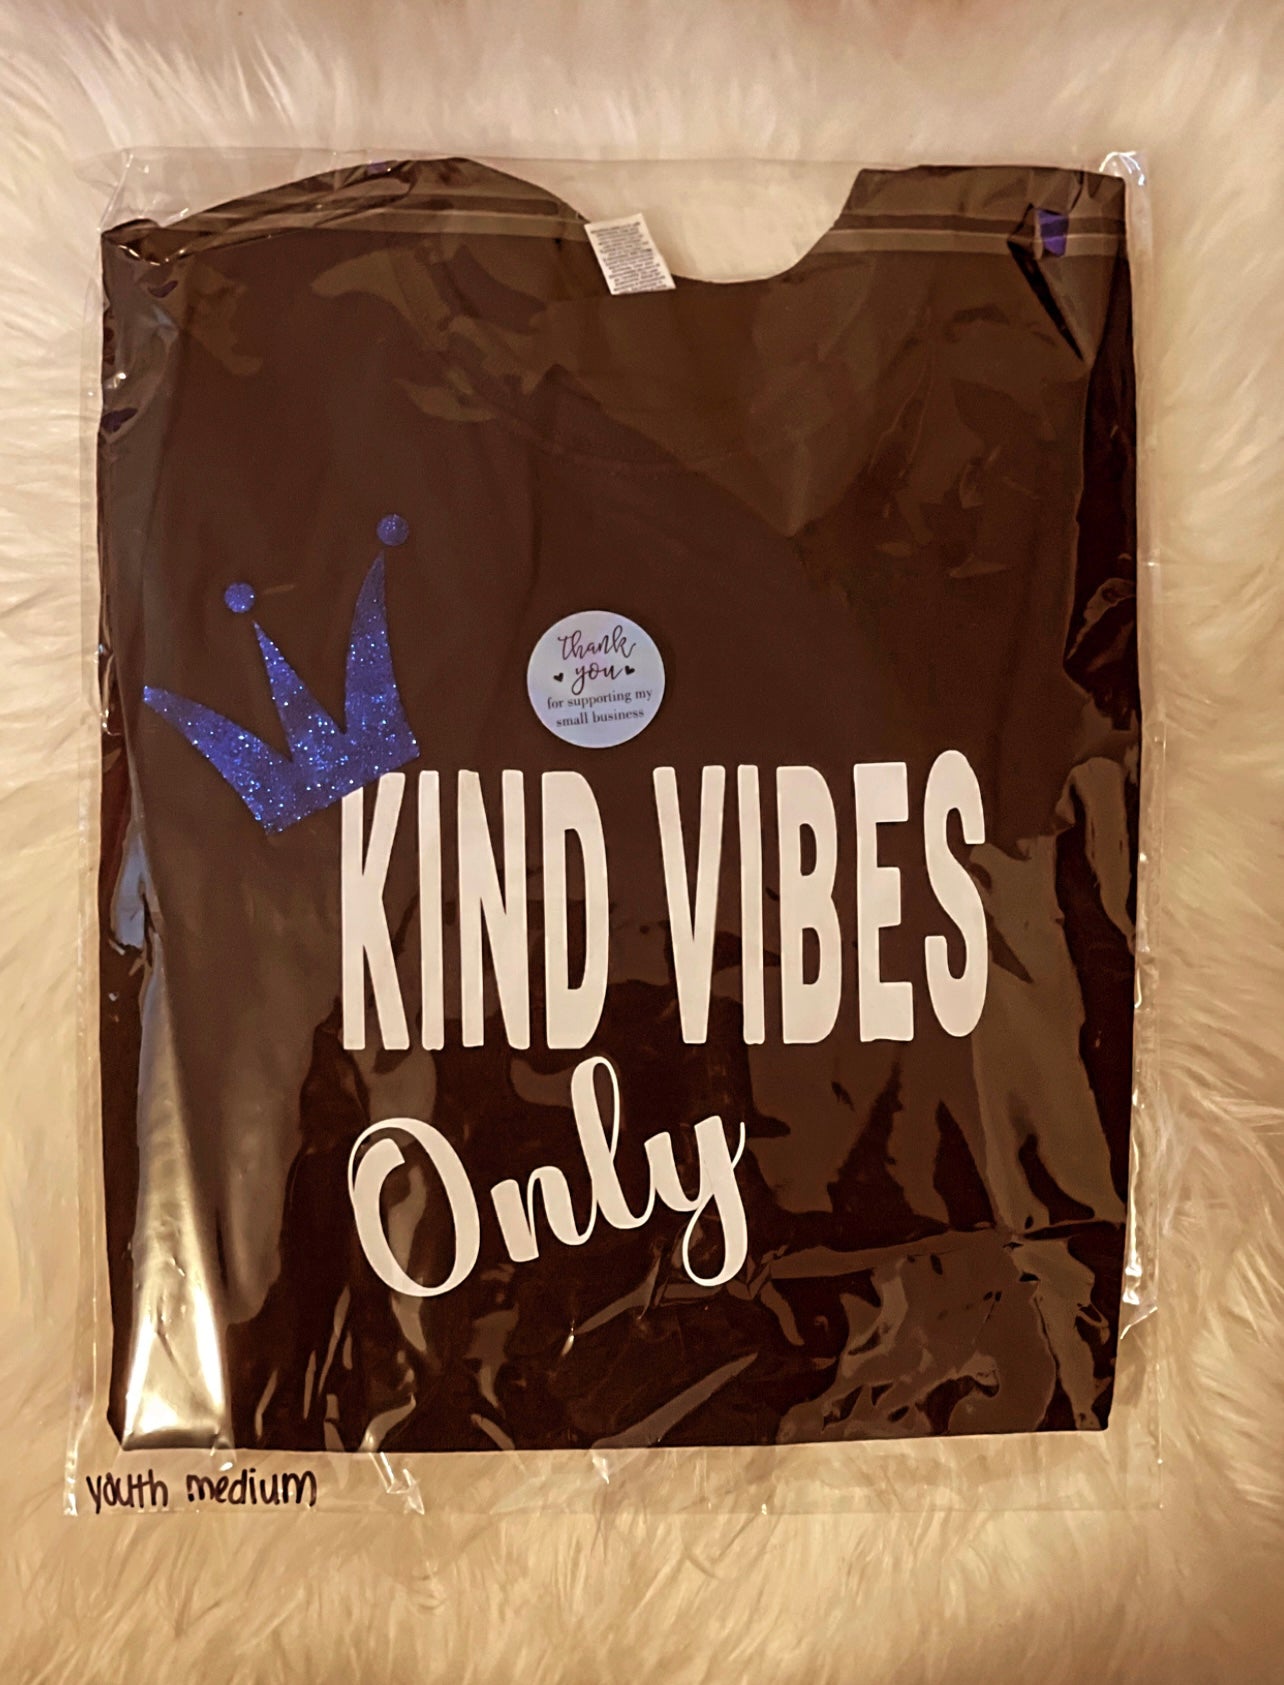 KIND VIBES YOUTH T-SHIRTS